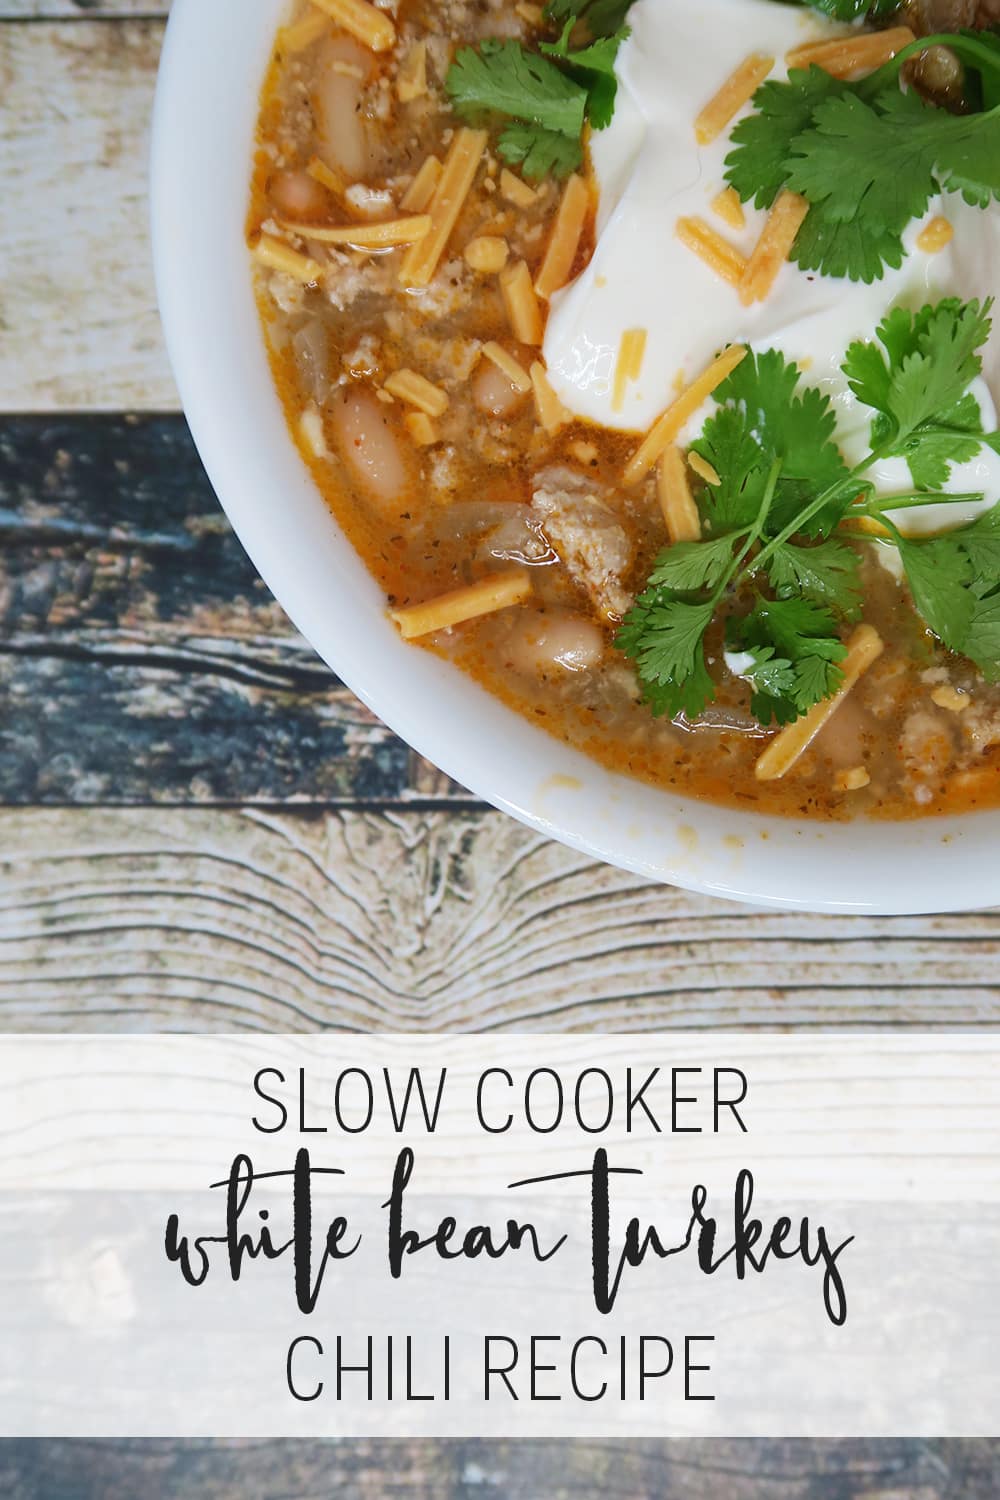 Need a hearty and healthy dish for the colder months? This Slow Cooker White Bean Turkey Chili recipe is super easy and ready in less than three hours!